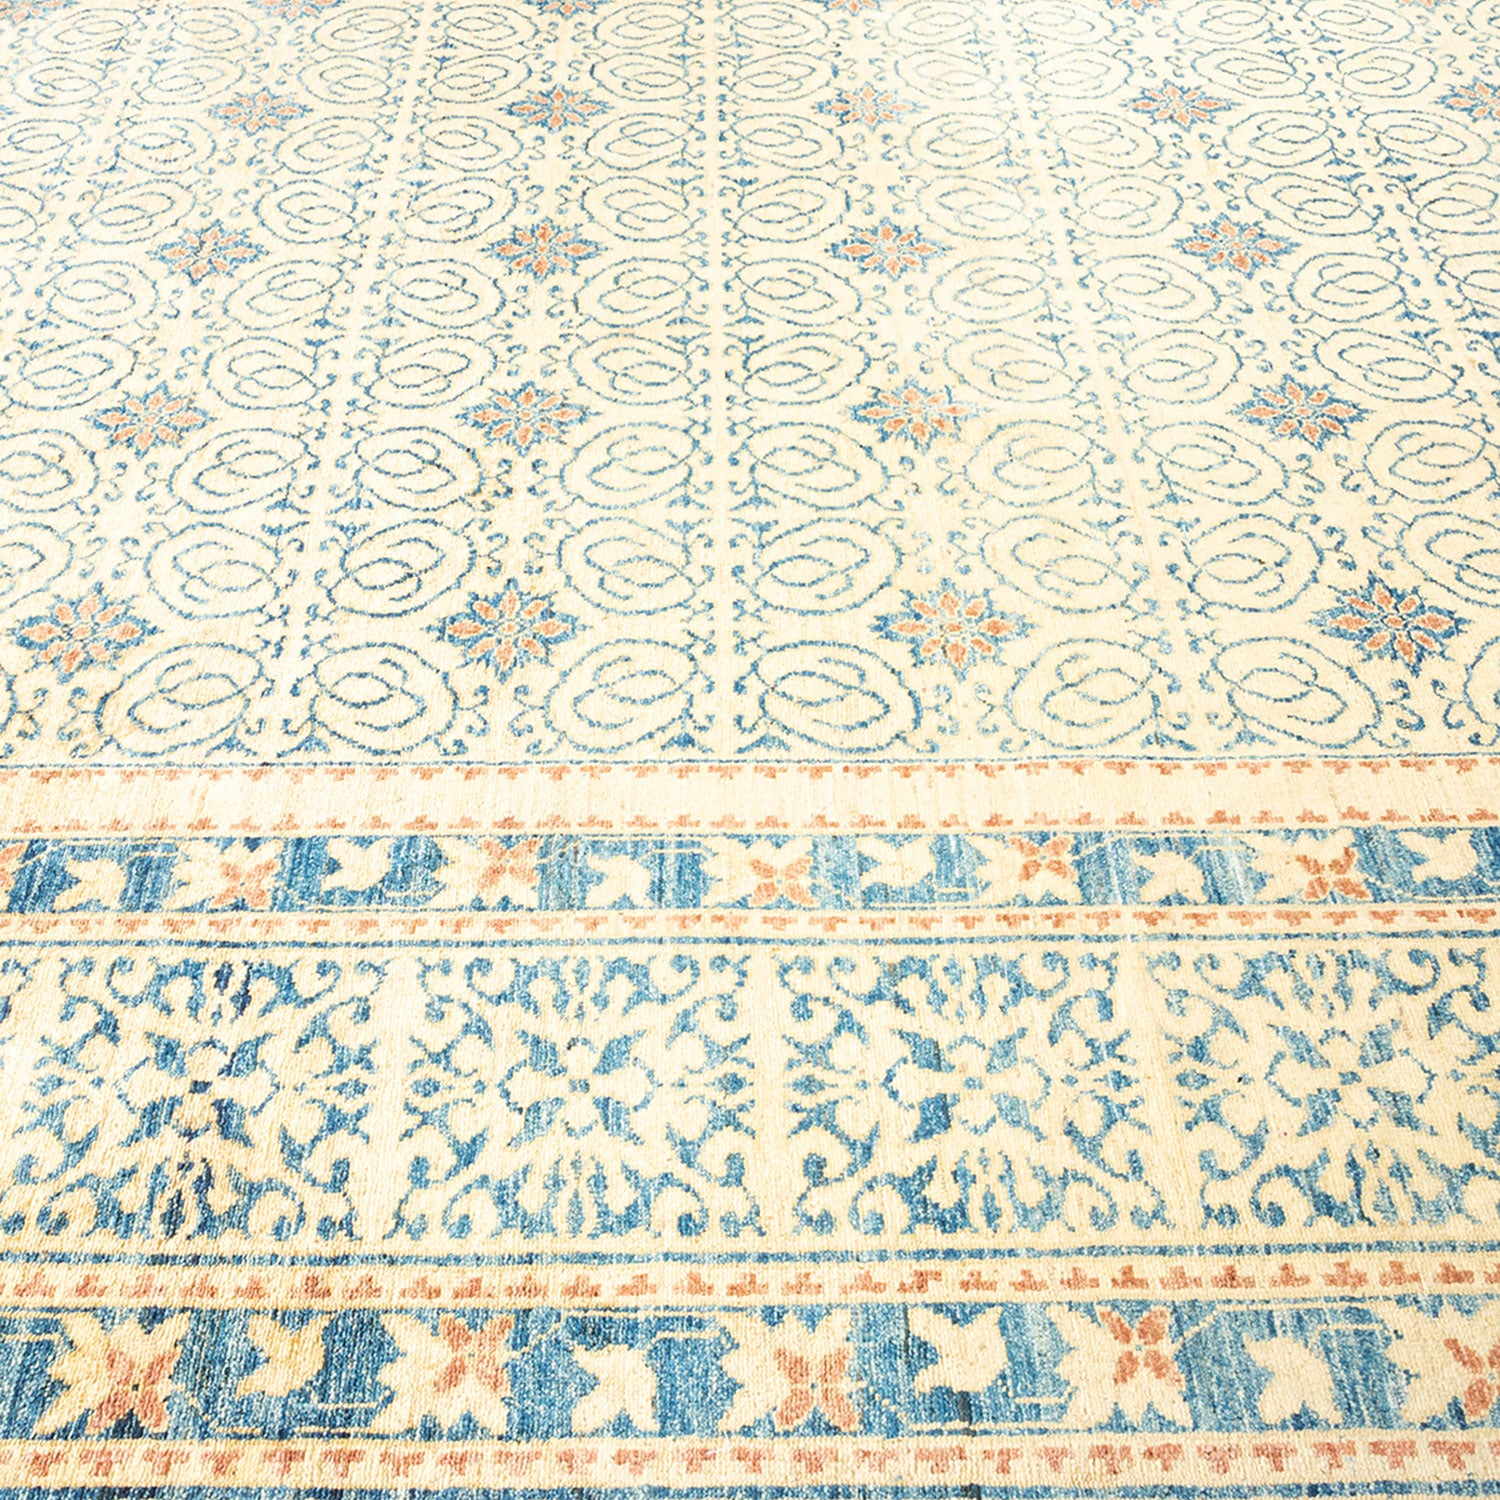 Elegant patterned carpet with traditional motifs in soft, delicate hues.